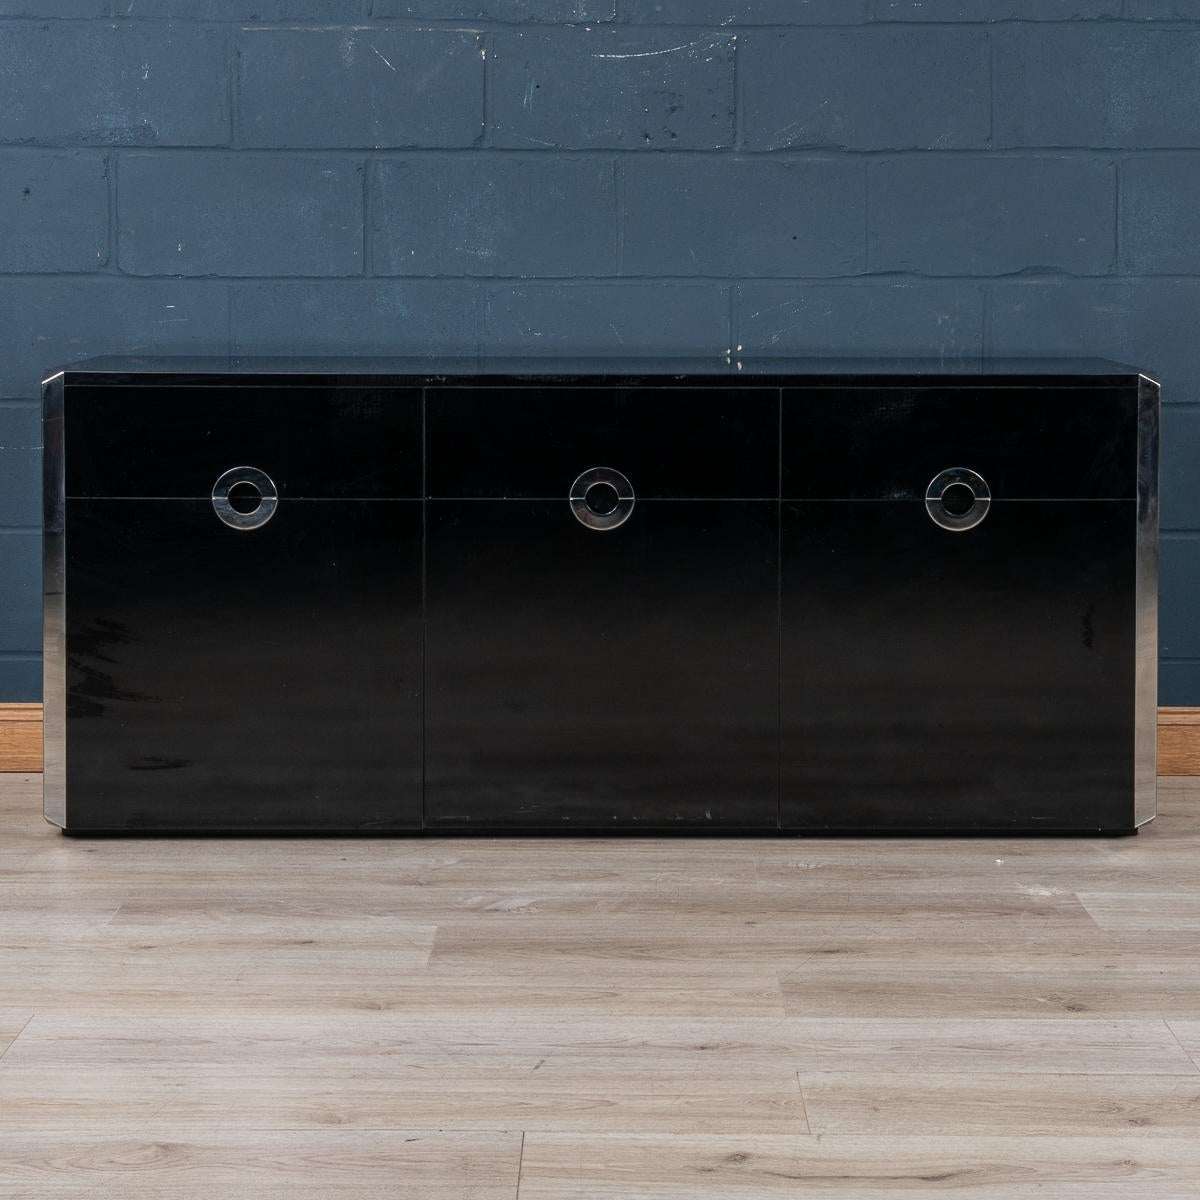 An elegant three-door sideboard designed by Willy Rizzo for Mario Sabot, produced in Italy in the 1970s. The gloss finish laminate veneer is beautifully accentuated by mirror polished stainless steel handles and edging. The two doors open 180